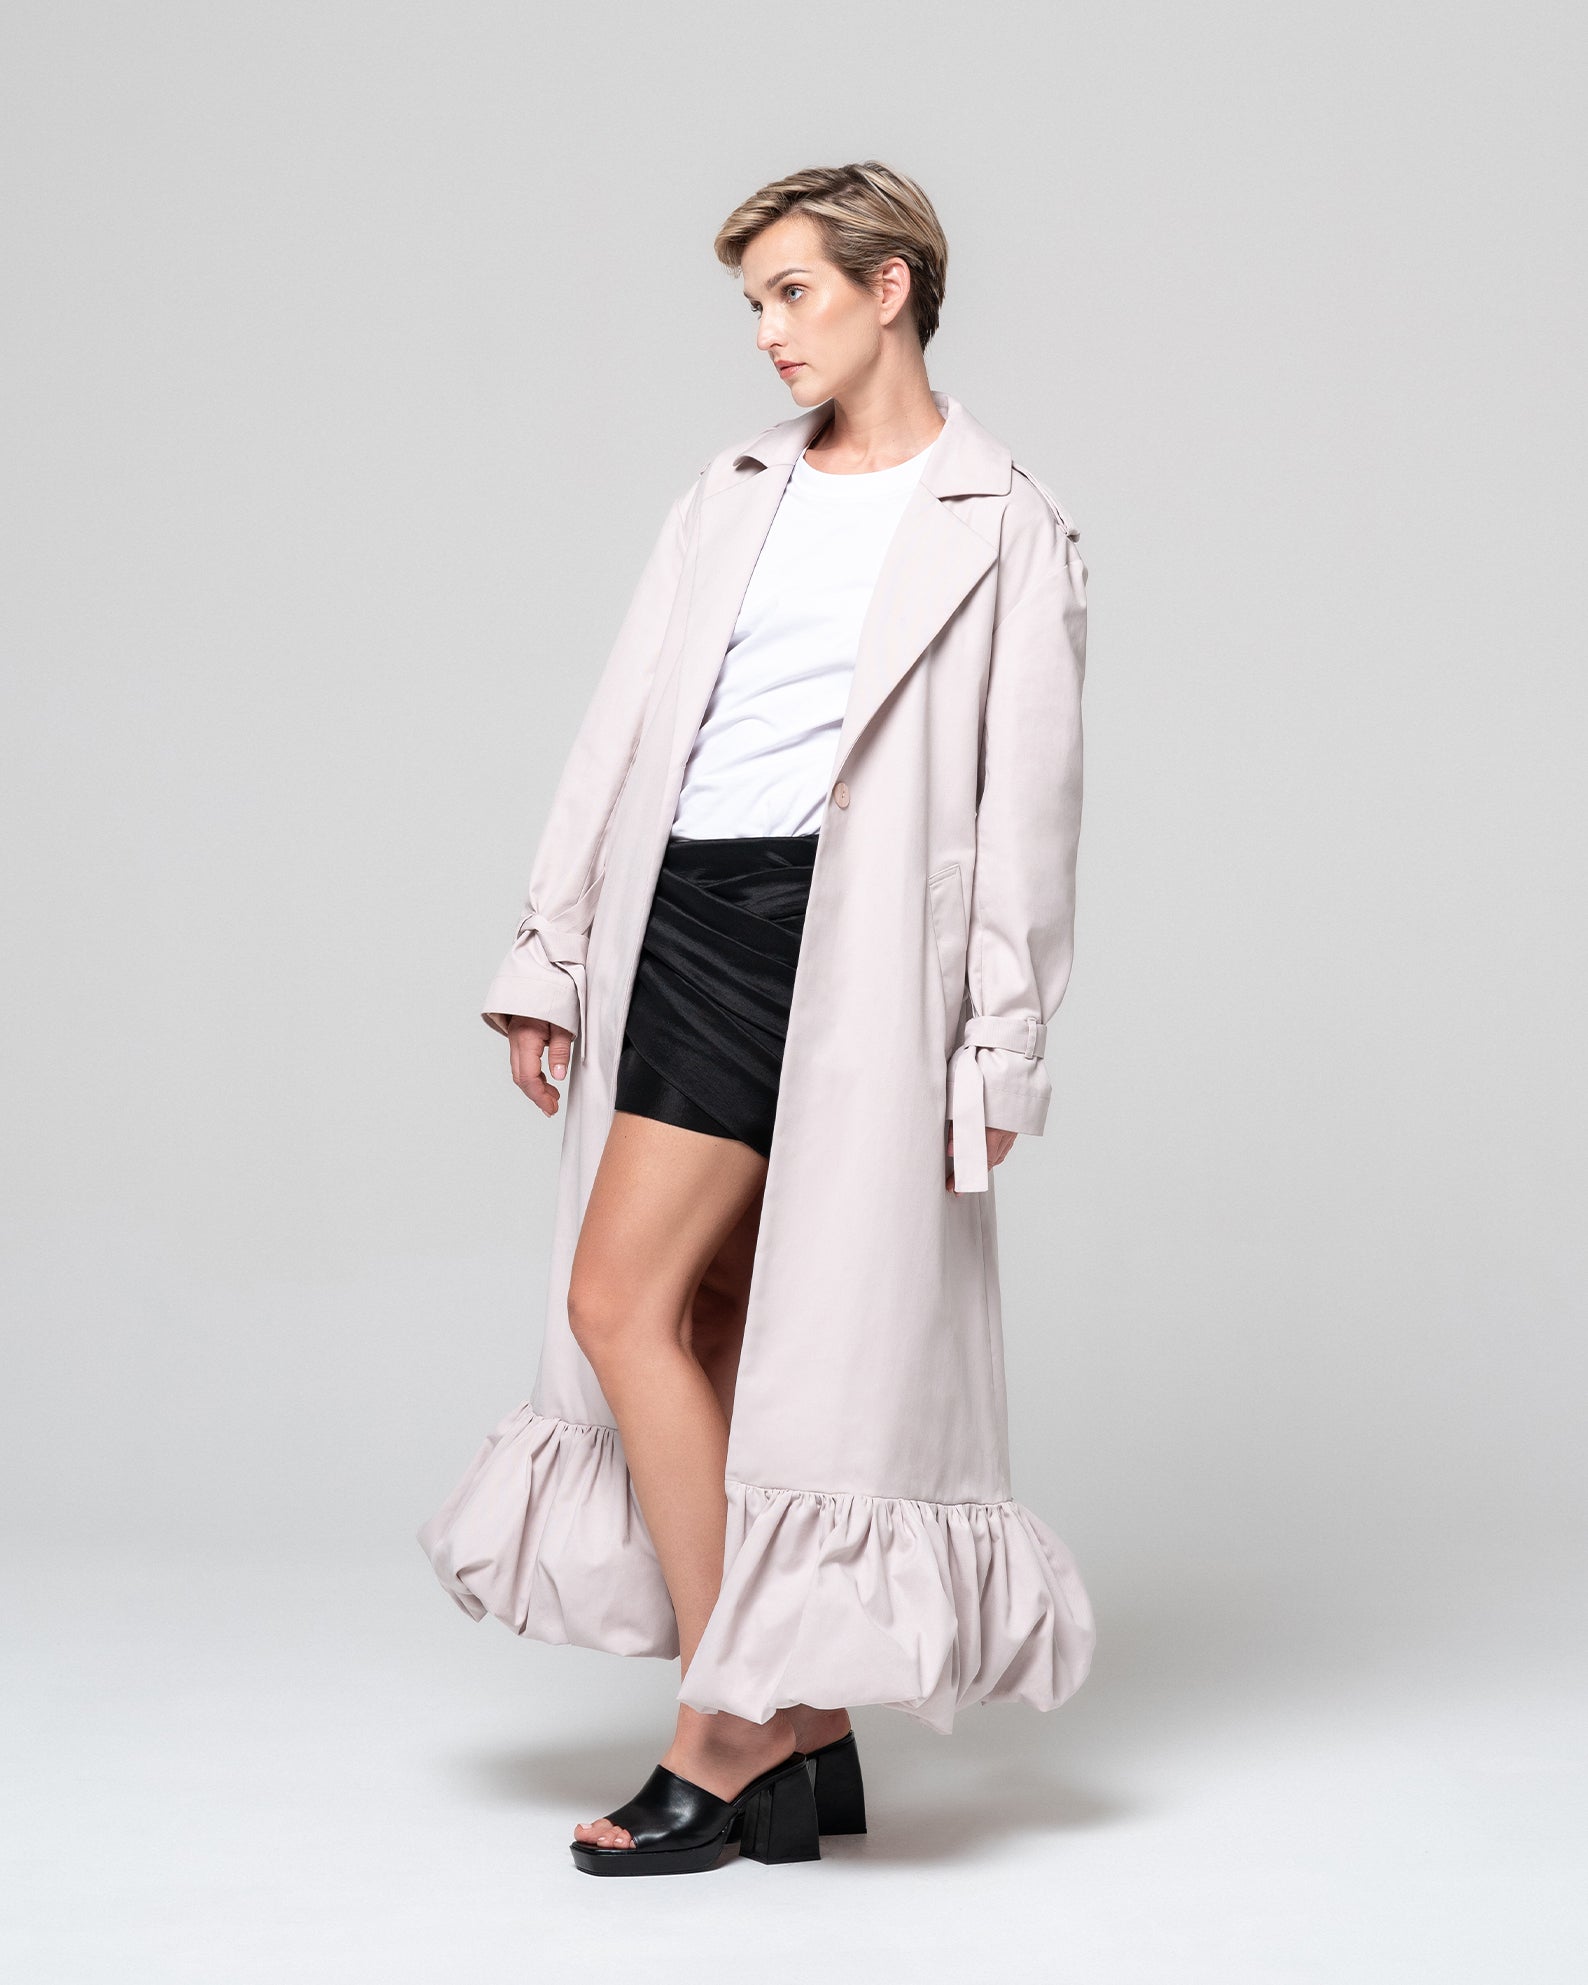 TAMY LIGHT GREY TRENCH COAT - RONI HELOU